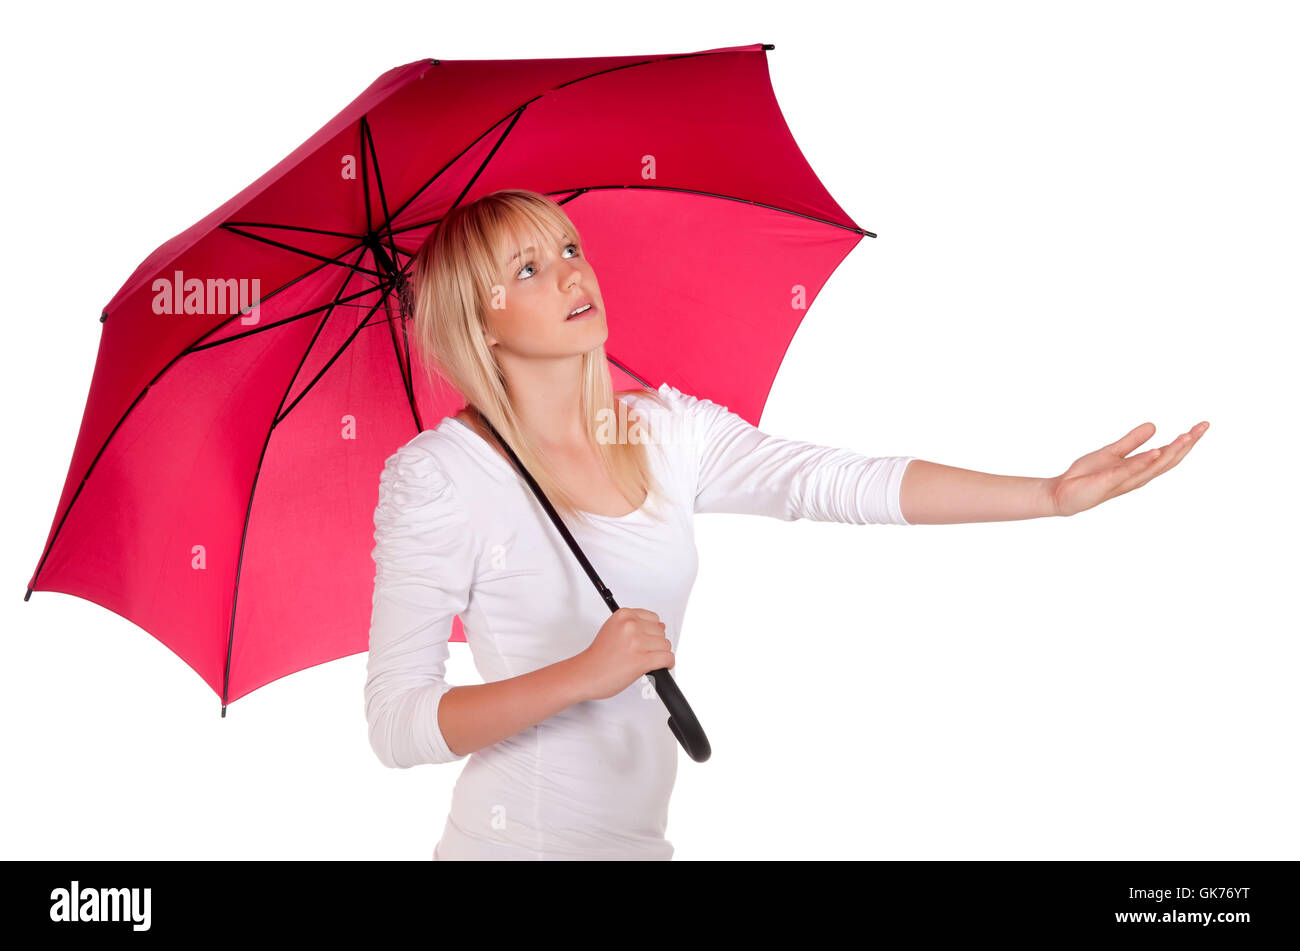 young woman with umbrella Stock Photo